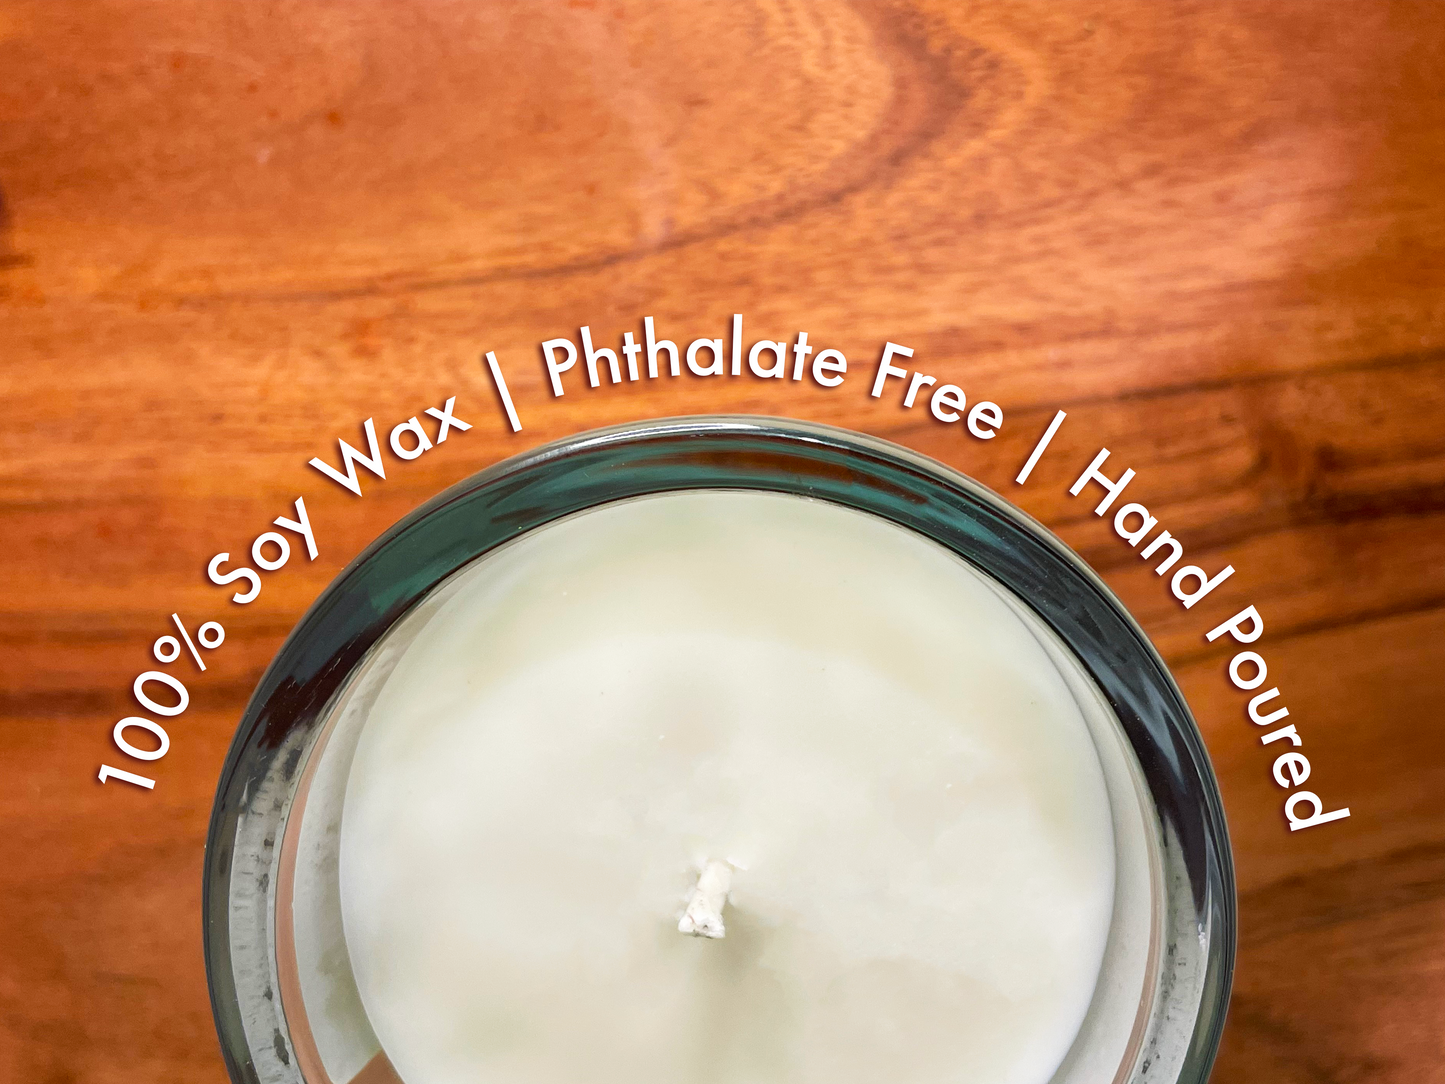 top view of a candle with the facts 100 percent soy wax, phthalate free, hand poured